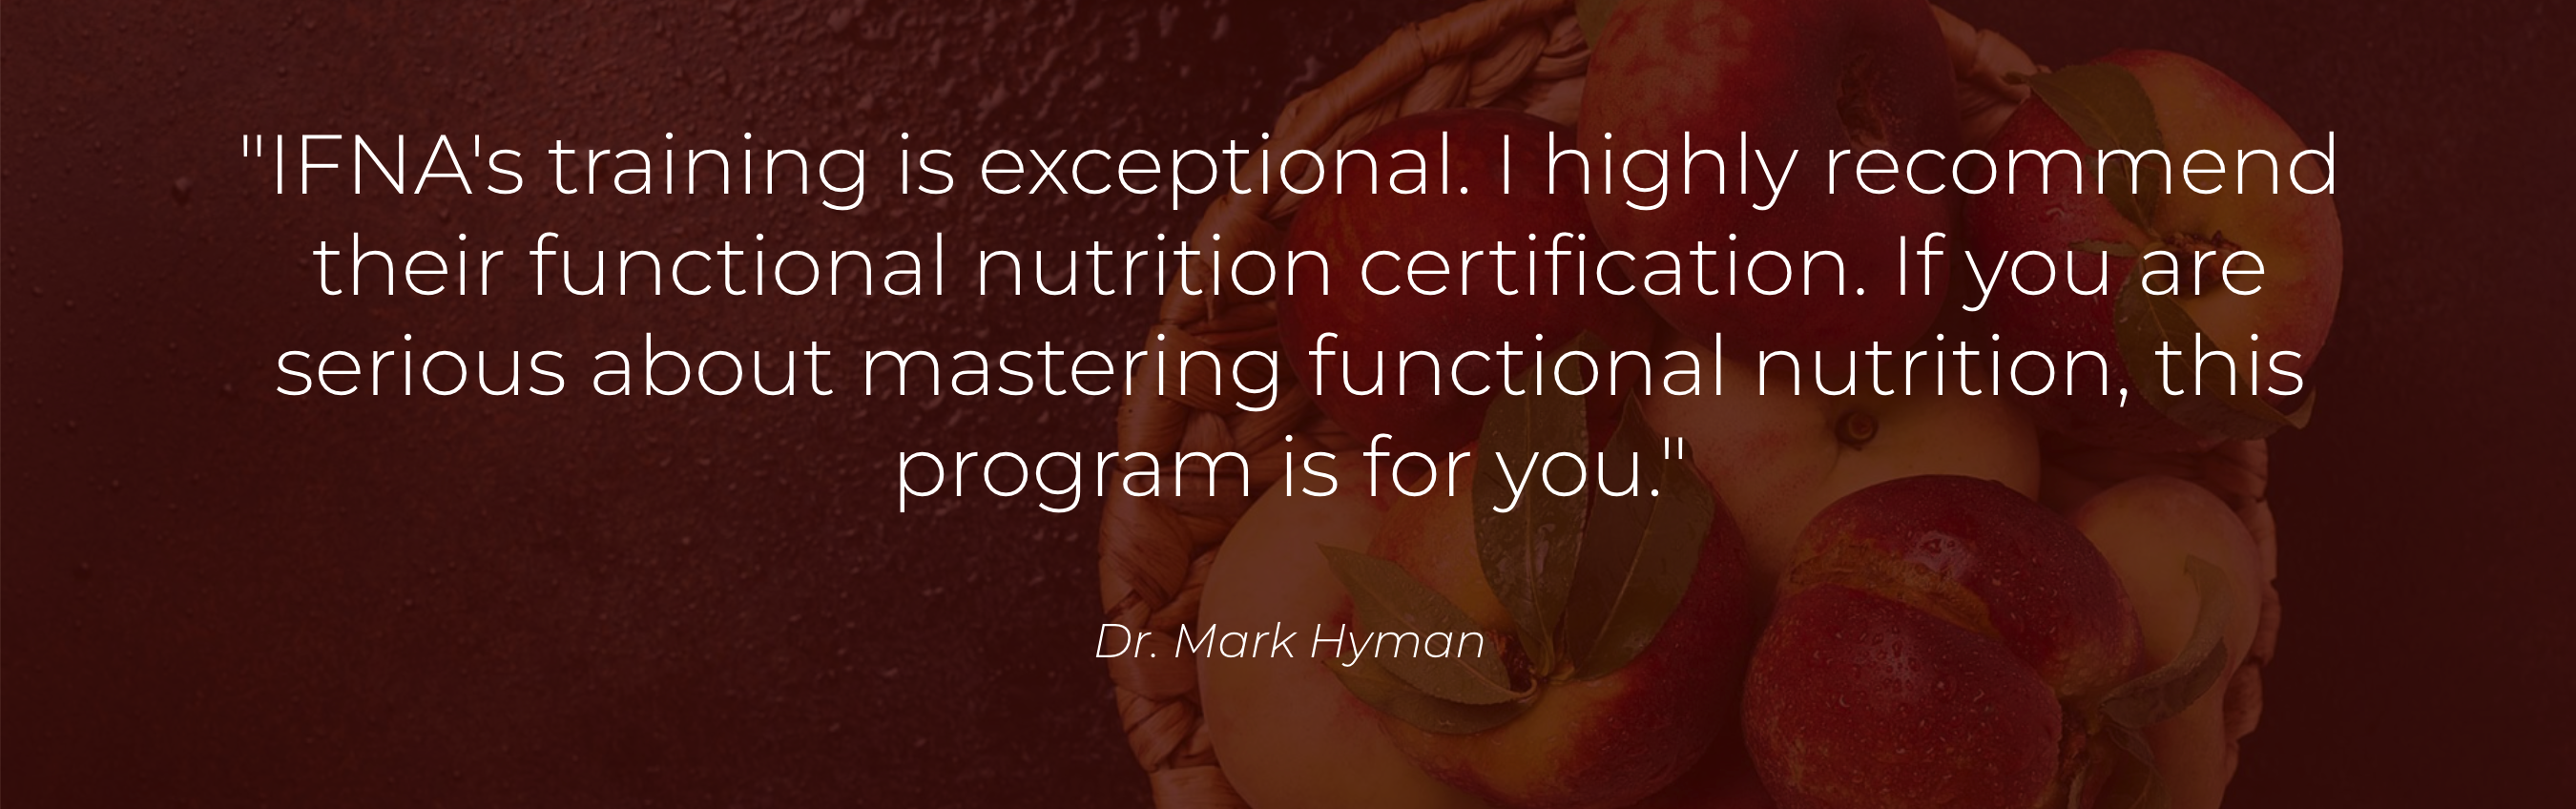 Dr. Mark Hyman recommendation